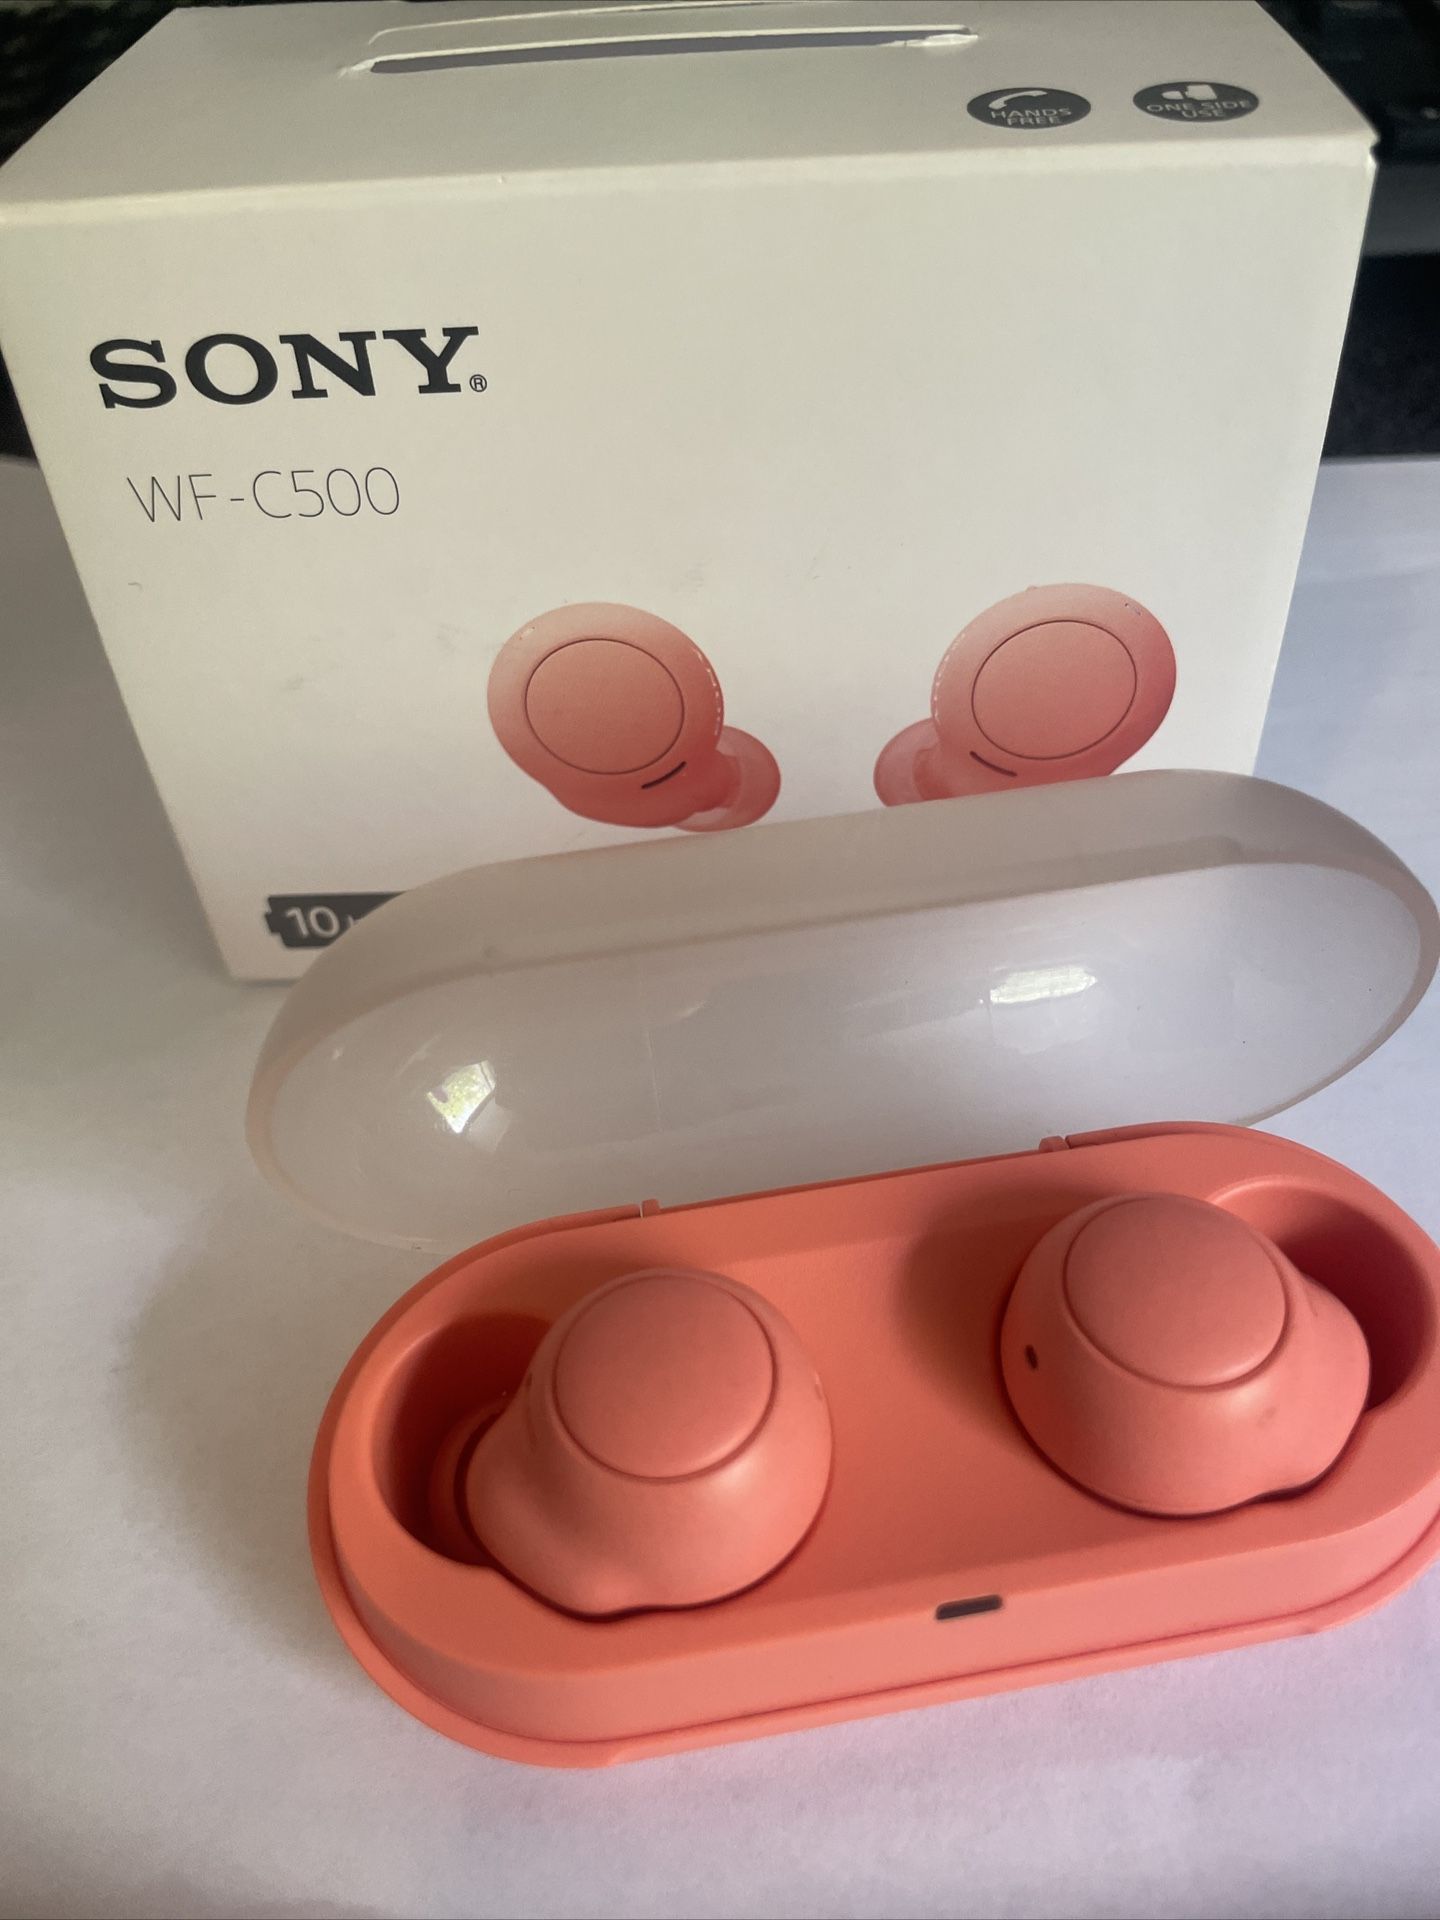 Sony WF-C500 Truly Wireless In-Ear Bluetooth Headphones - Coral(pink)